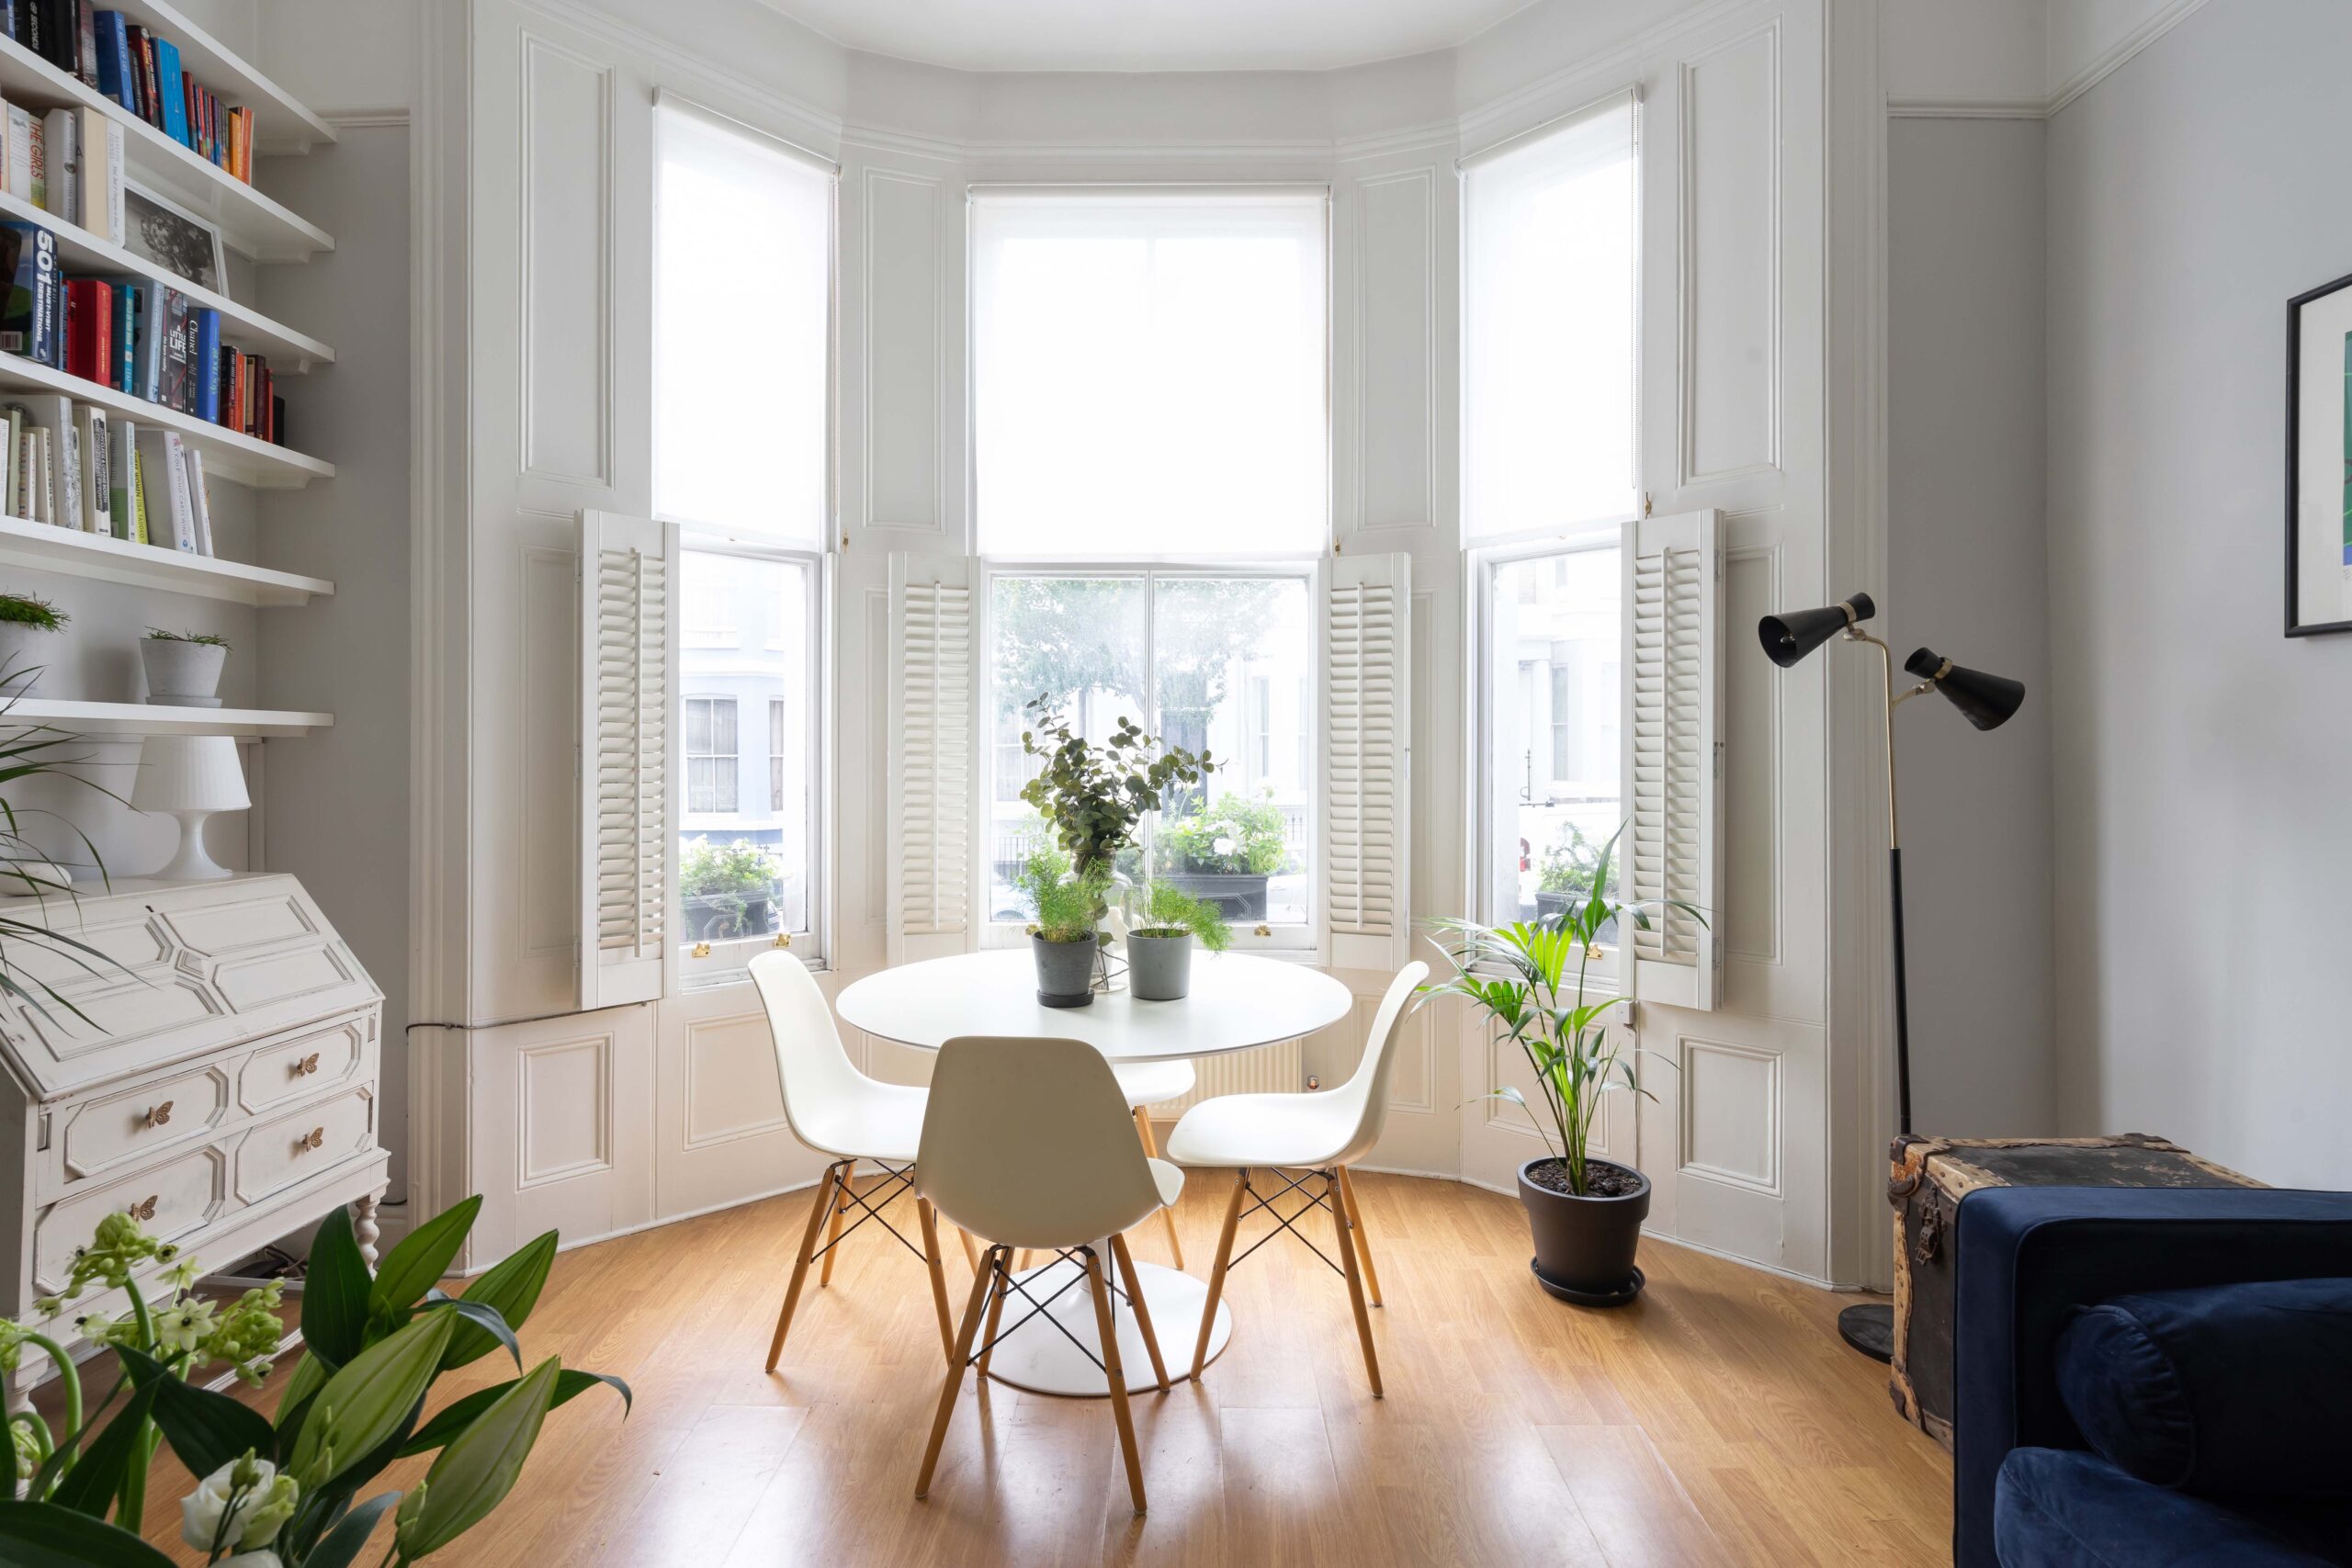 For Sale: Westbourne Park Road Notting Hill dining table in bay window with house plants